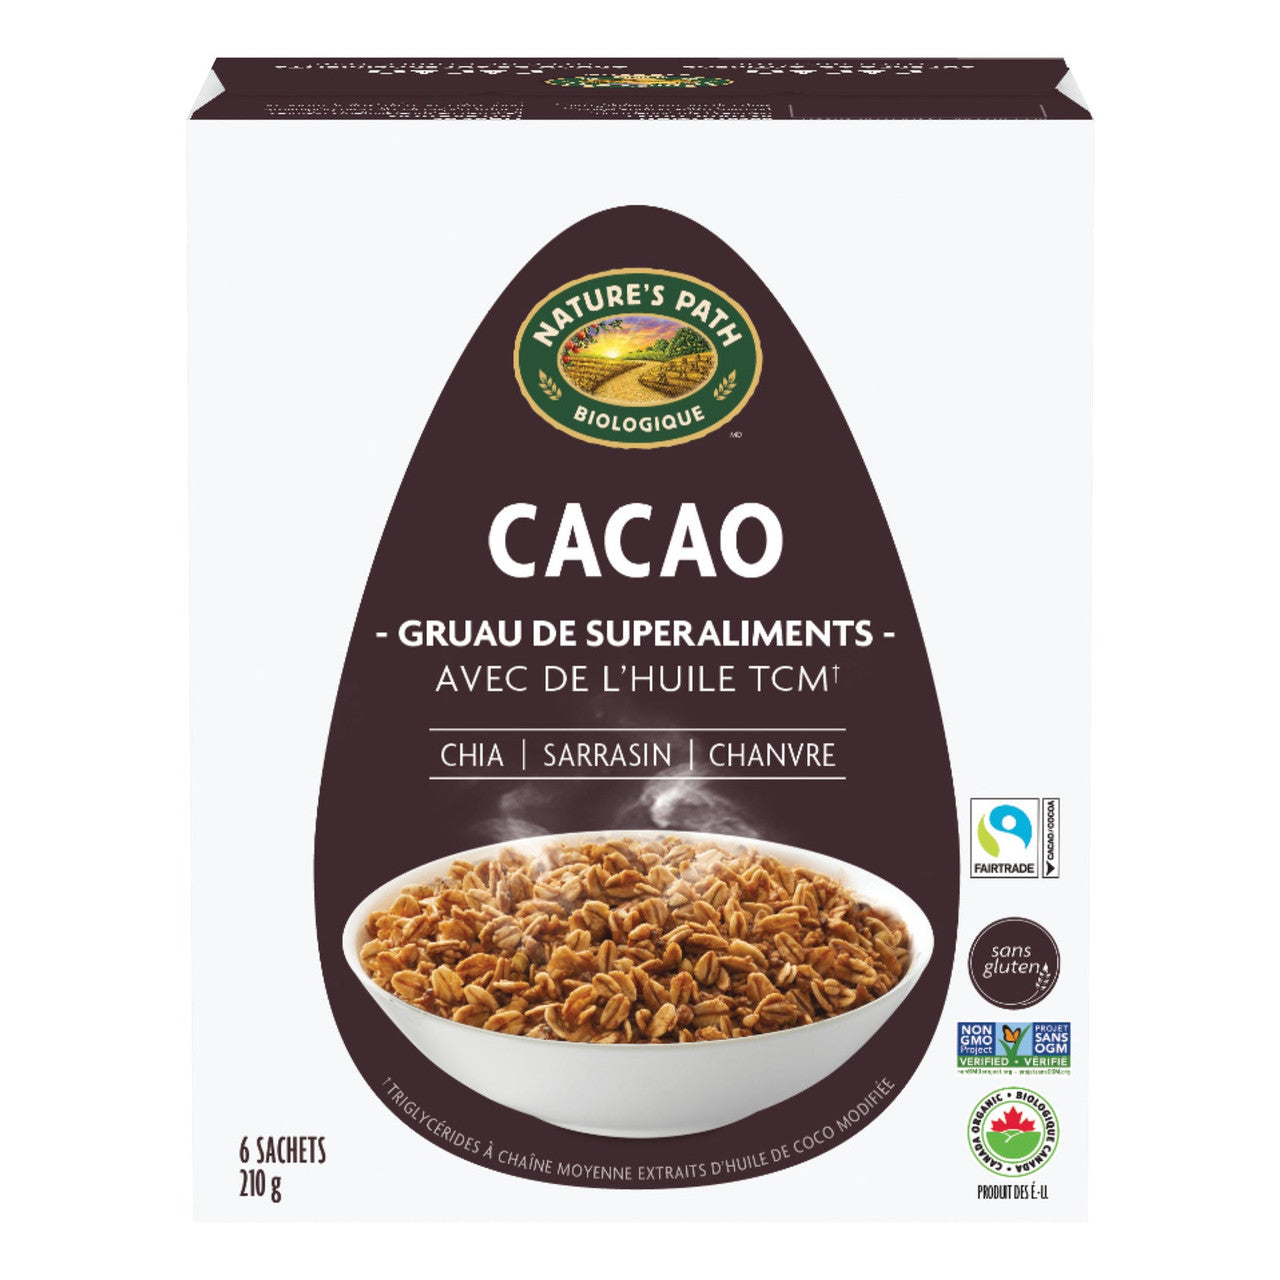 Nature's Path Cacao Superfood Oatmeal with Chia, Buckwheat, and Hemp, 6 packets, 210g/7.3 oz. Box {Imported from Canada}